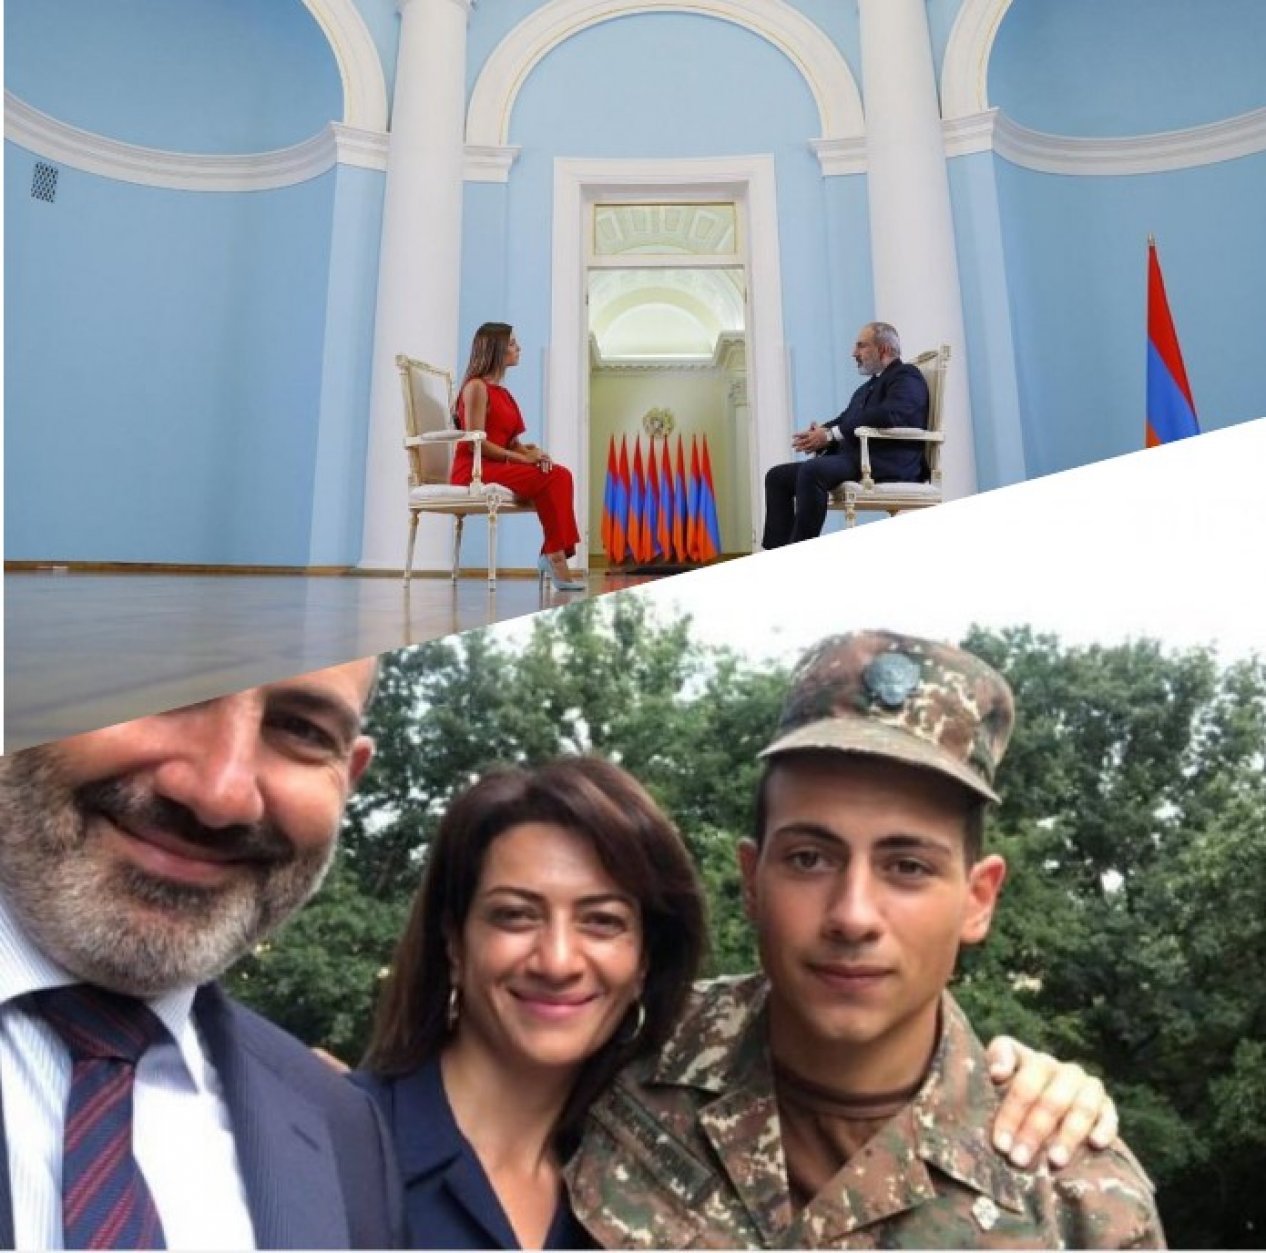 Pashinyan: My son and my wife participated in 44-day war